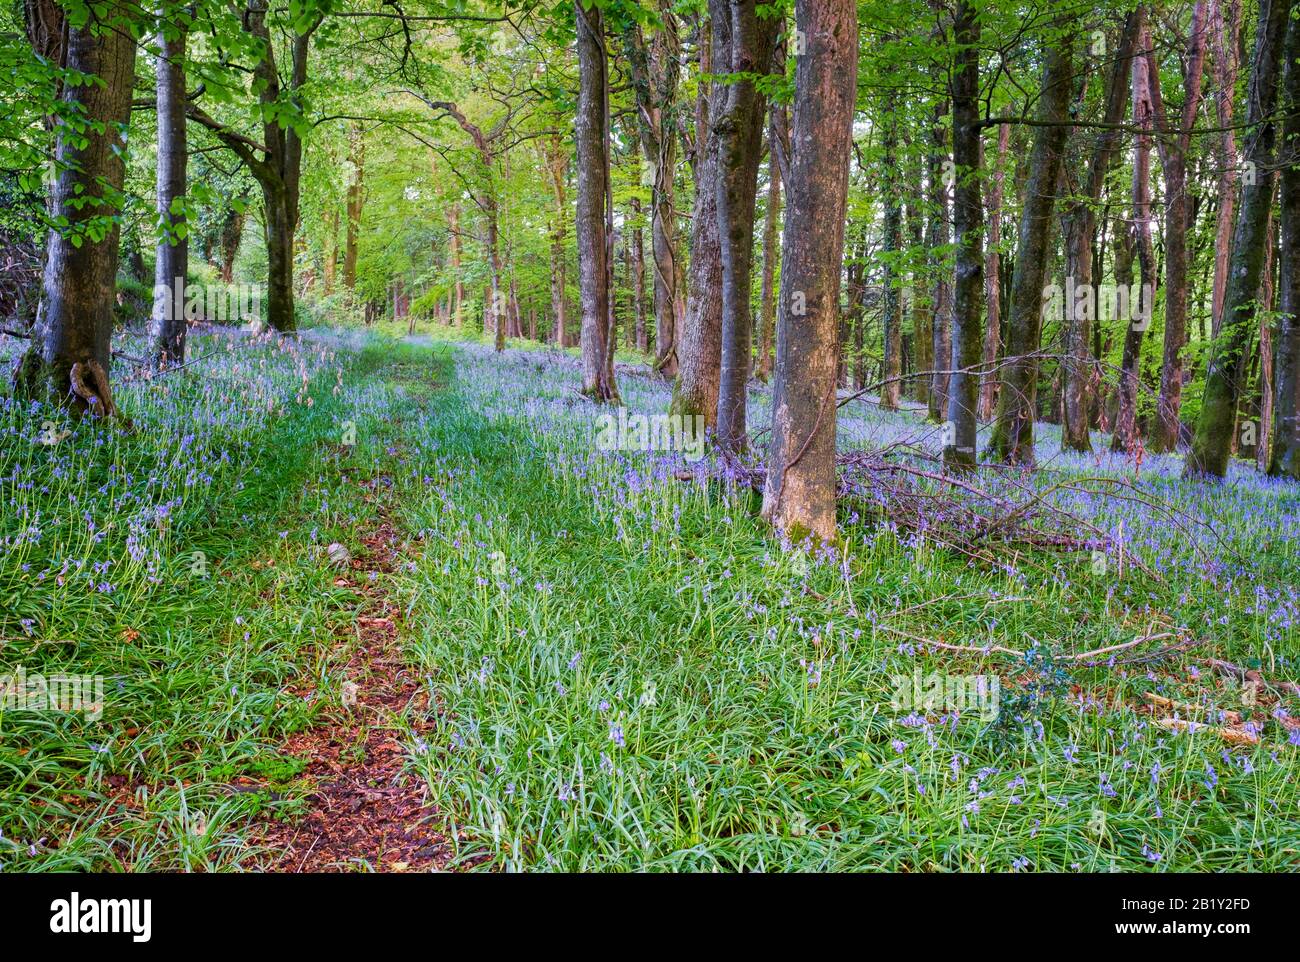 Bluebells in the woodland in North Devon, wild flowers in this gorgeous Devon countryside, South West, Uk Stock Photo